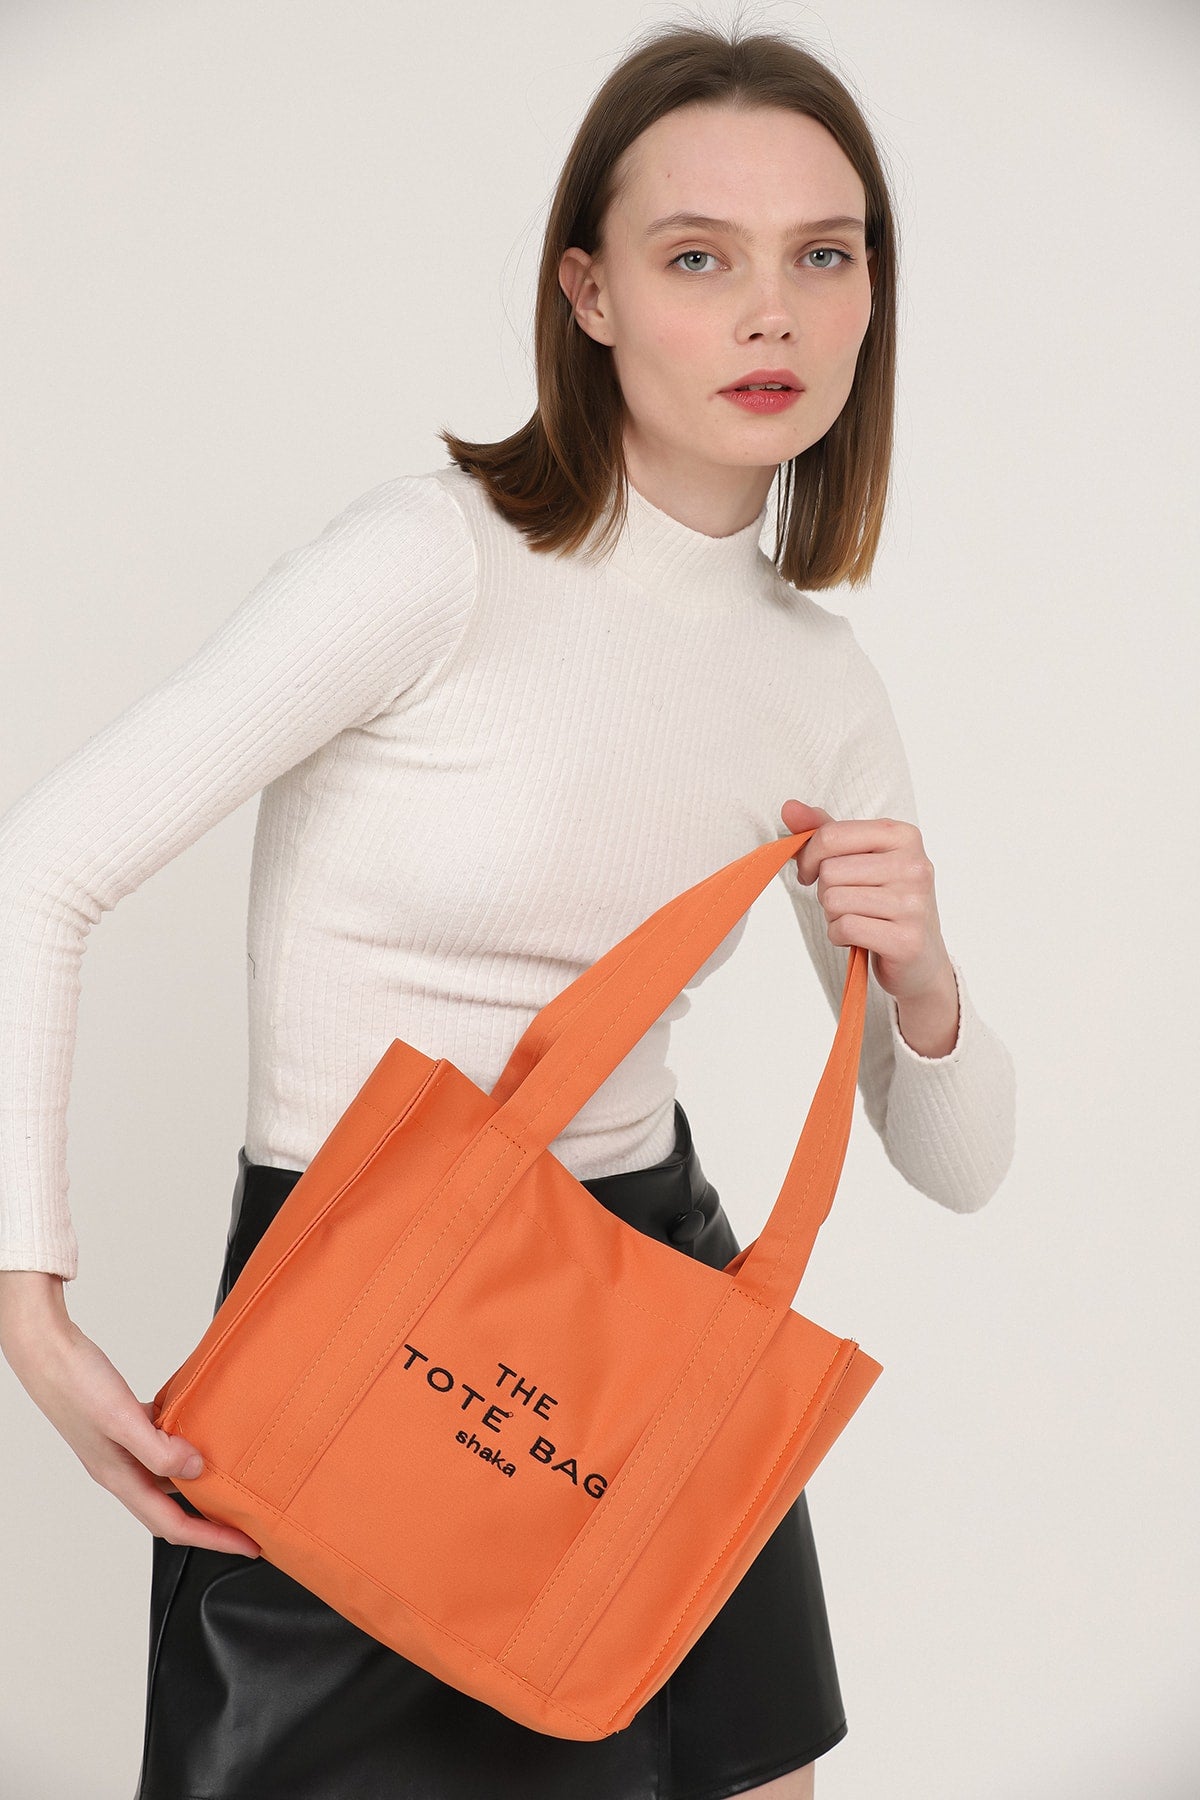 Orange U45 Snap Closure The Tote Bag Embroidered Canvas Fabric Casual Women's Arm And Shoulder Bag 25